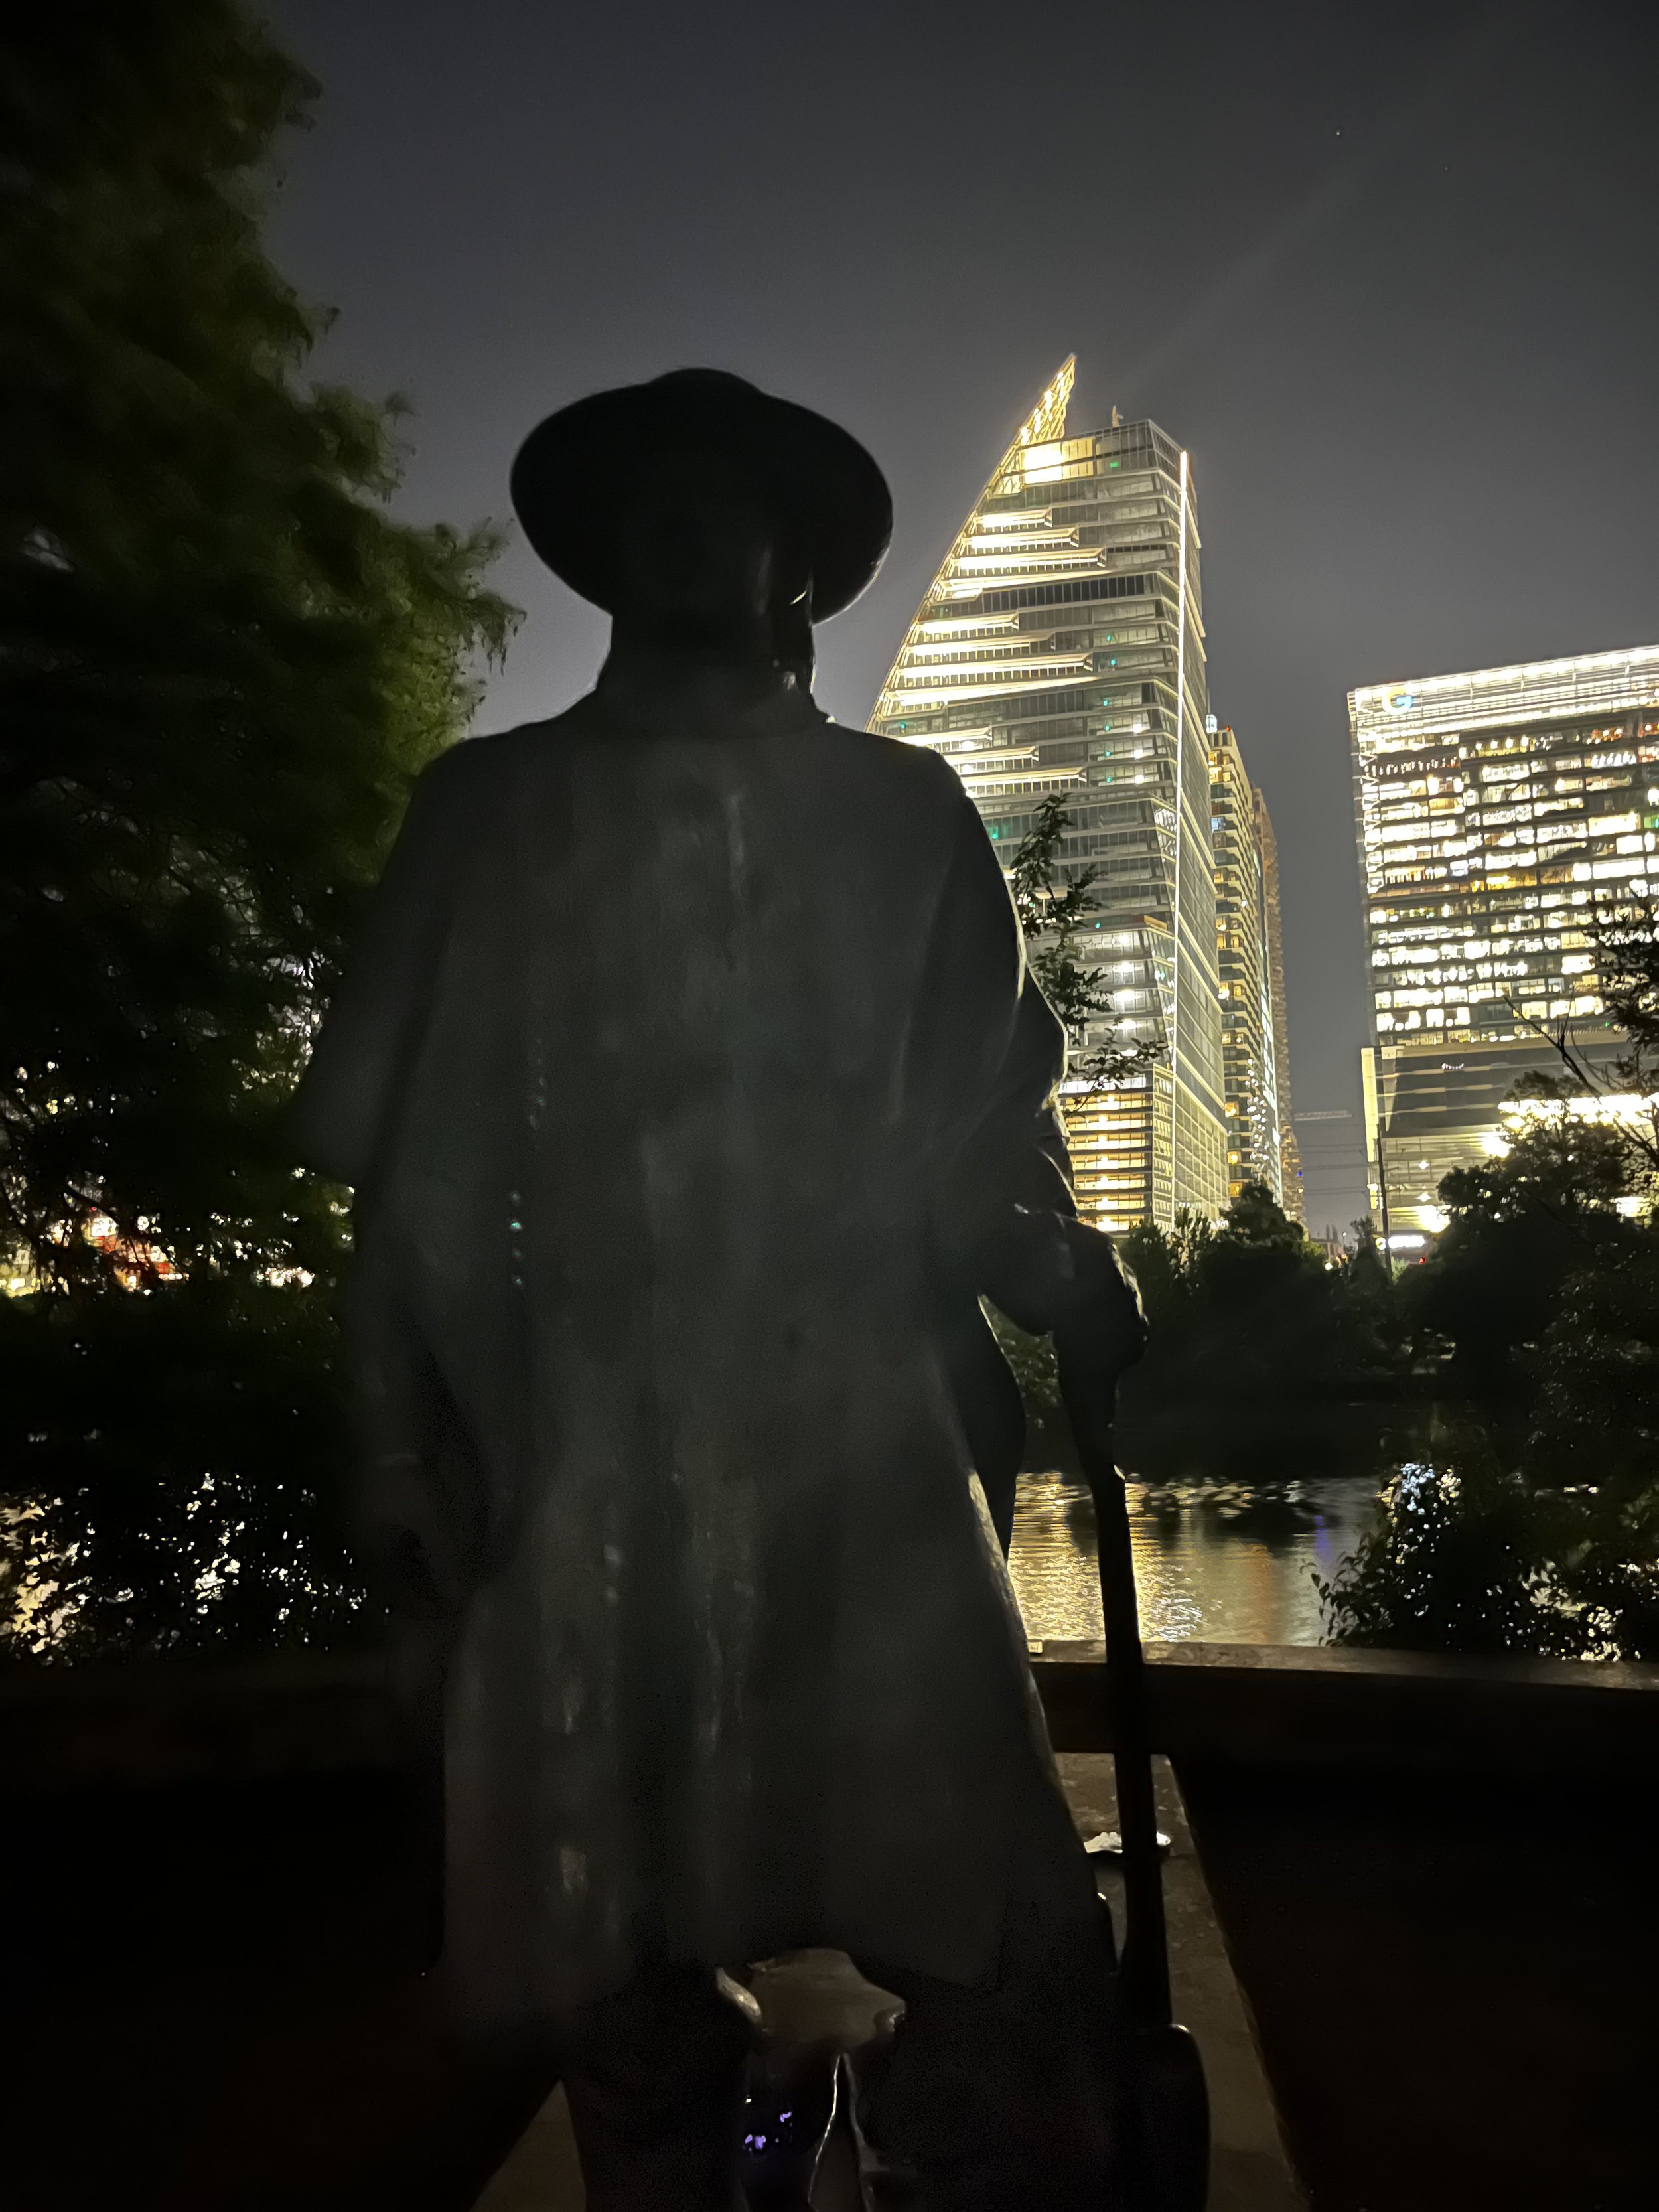 Stevie Ray Vaughan on the Austin Waterfront